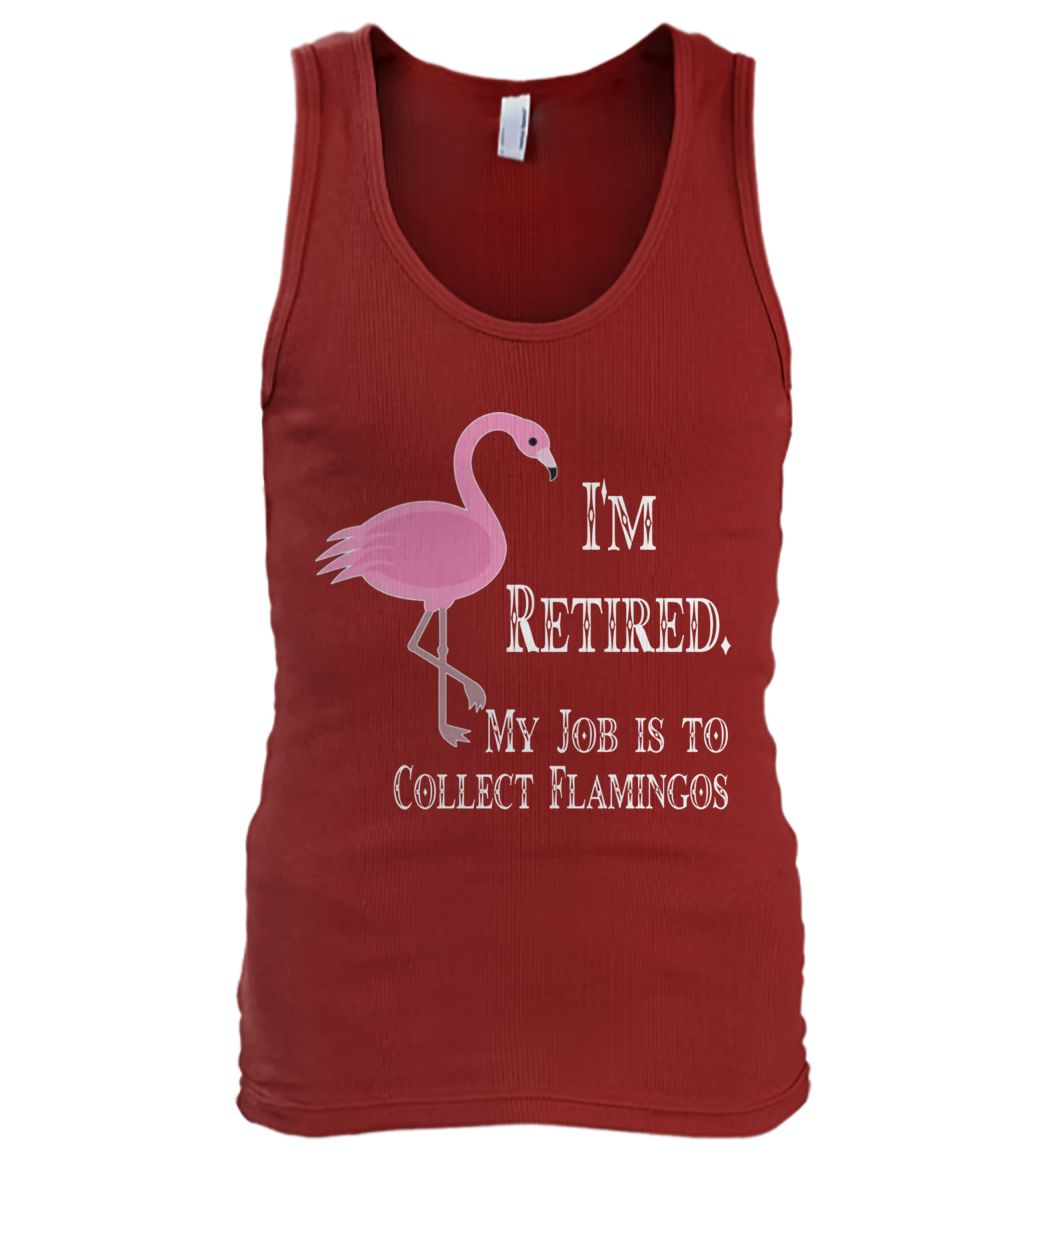 I'm retired my job is to collect flamingos men's tank top